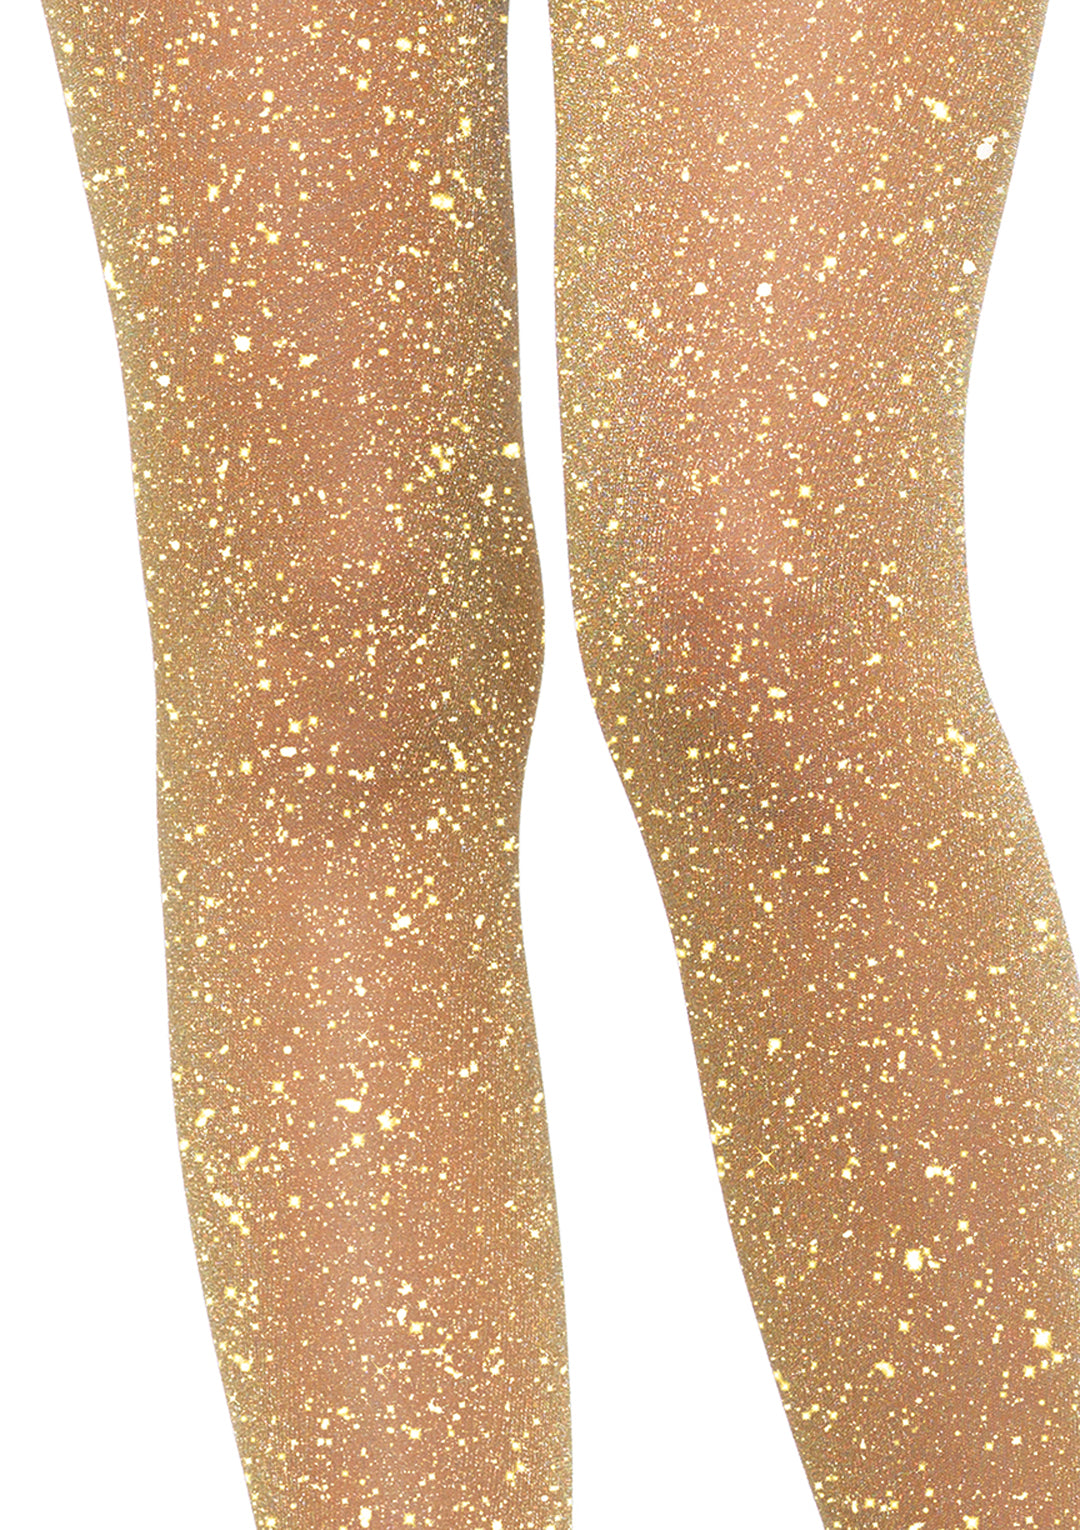 Women's Lurex Sparkly Shiny Glitter Footed Tights, 3 Pairs, Assorted 